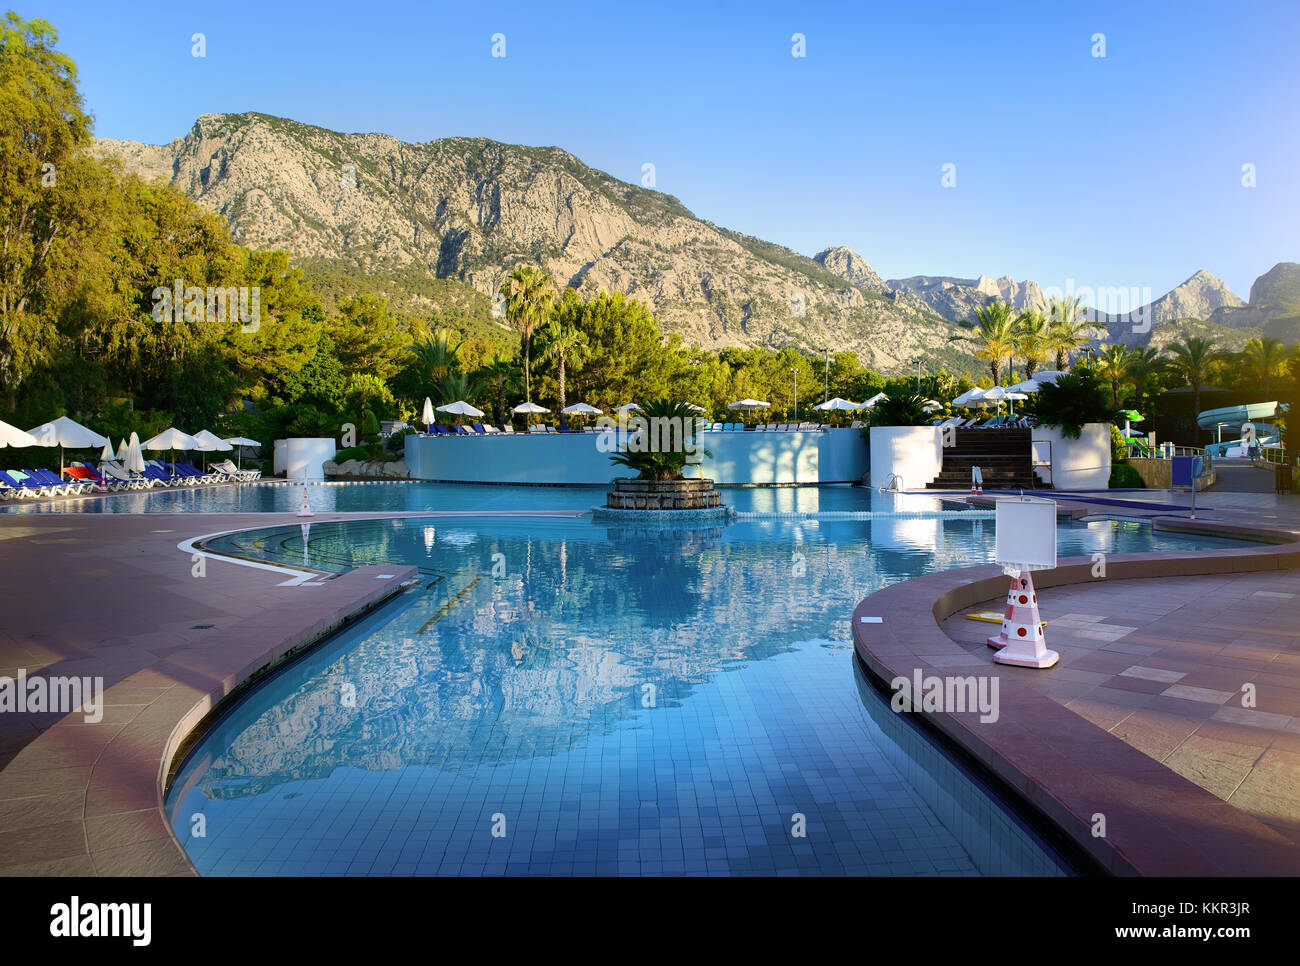 Outdoor swimming pool with water, Kemer, Turkey Stock Photo